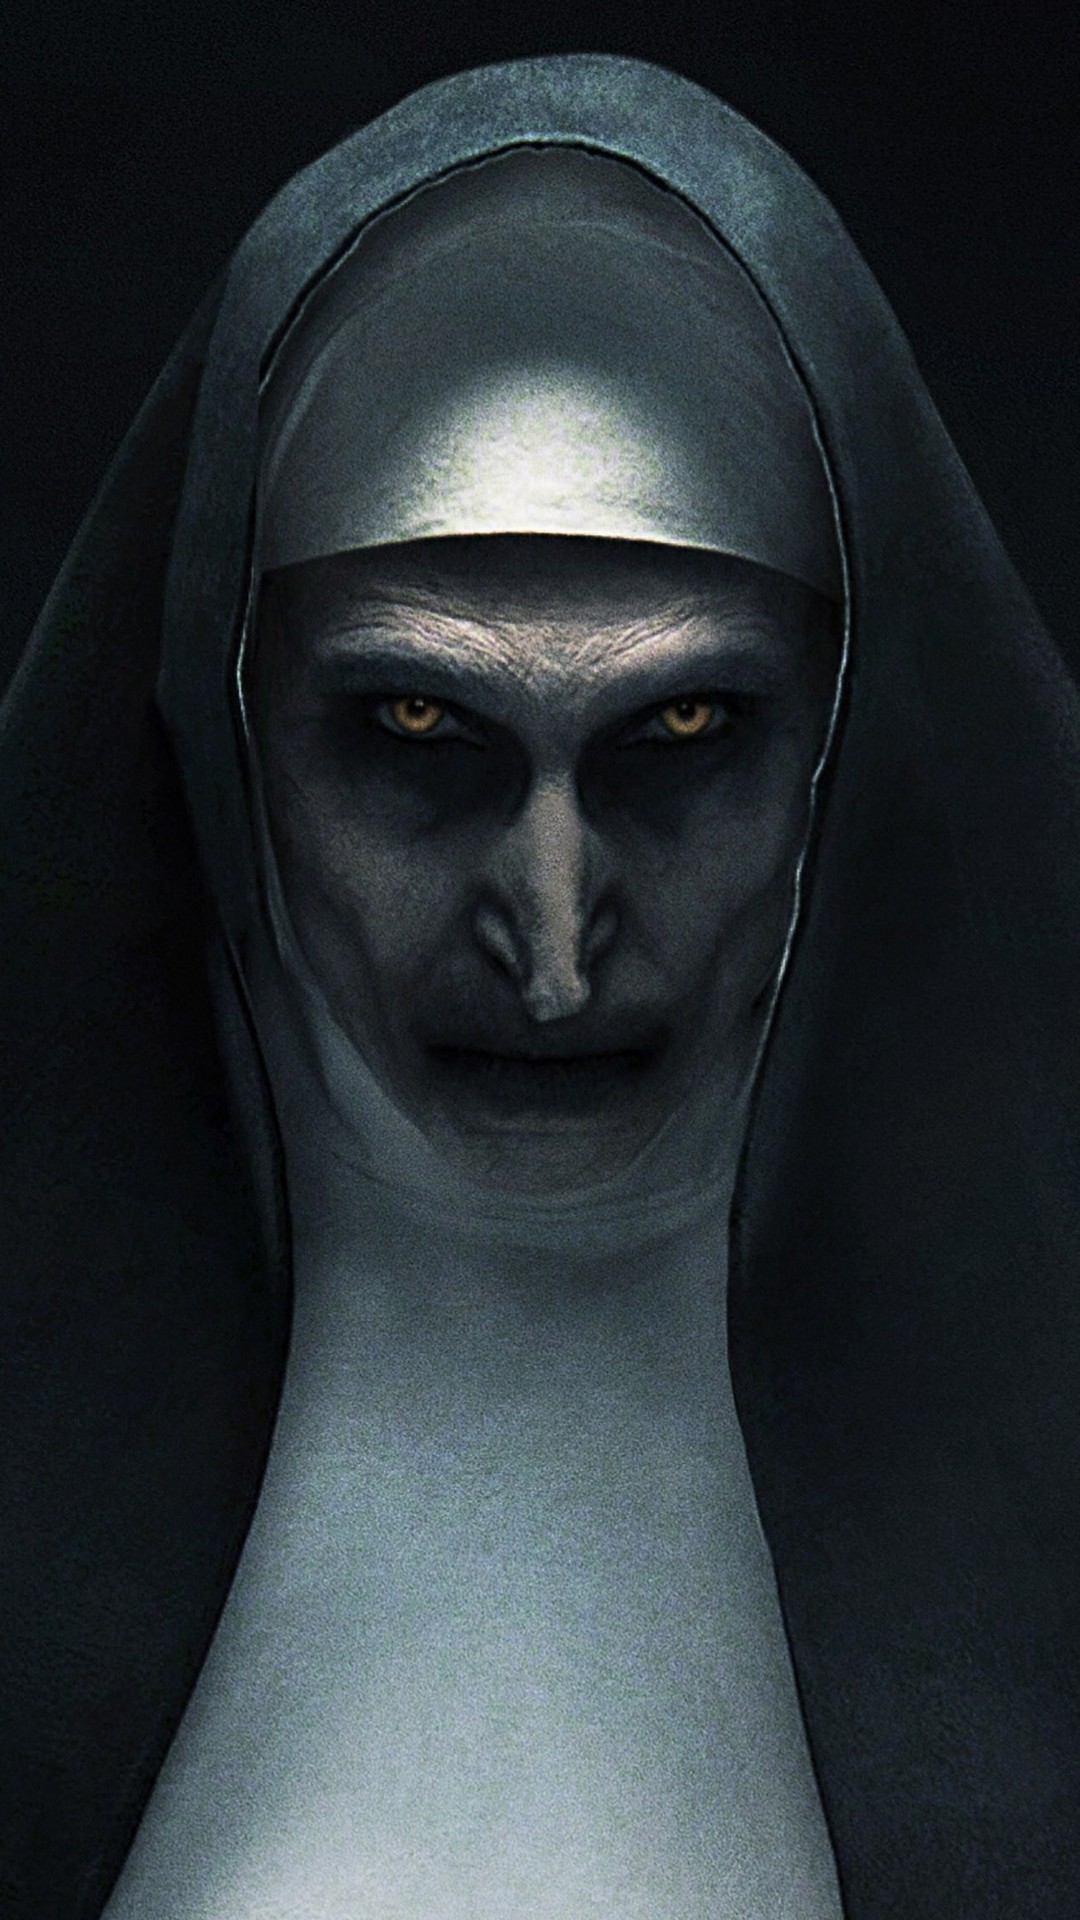 The Nun Wallpaper iPhone with image resolution 1080x1920 pixel. You can make this wallpaper for your iPhone 5, 6, 7, 8, X backgrounds, Mobile Screensaver, or iPad Lock Screen